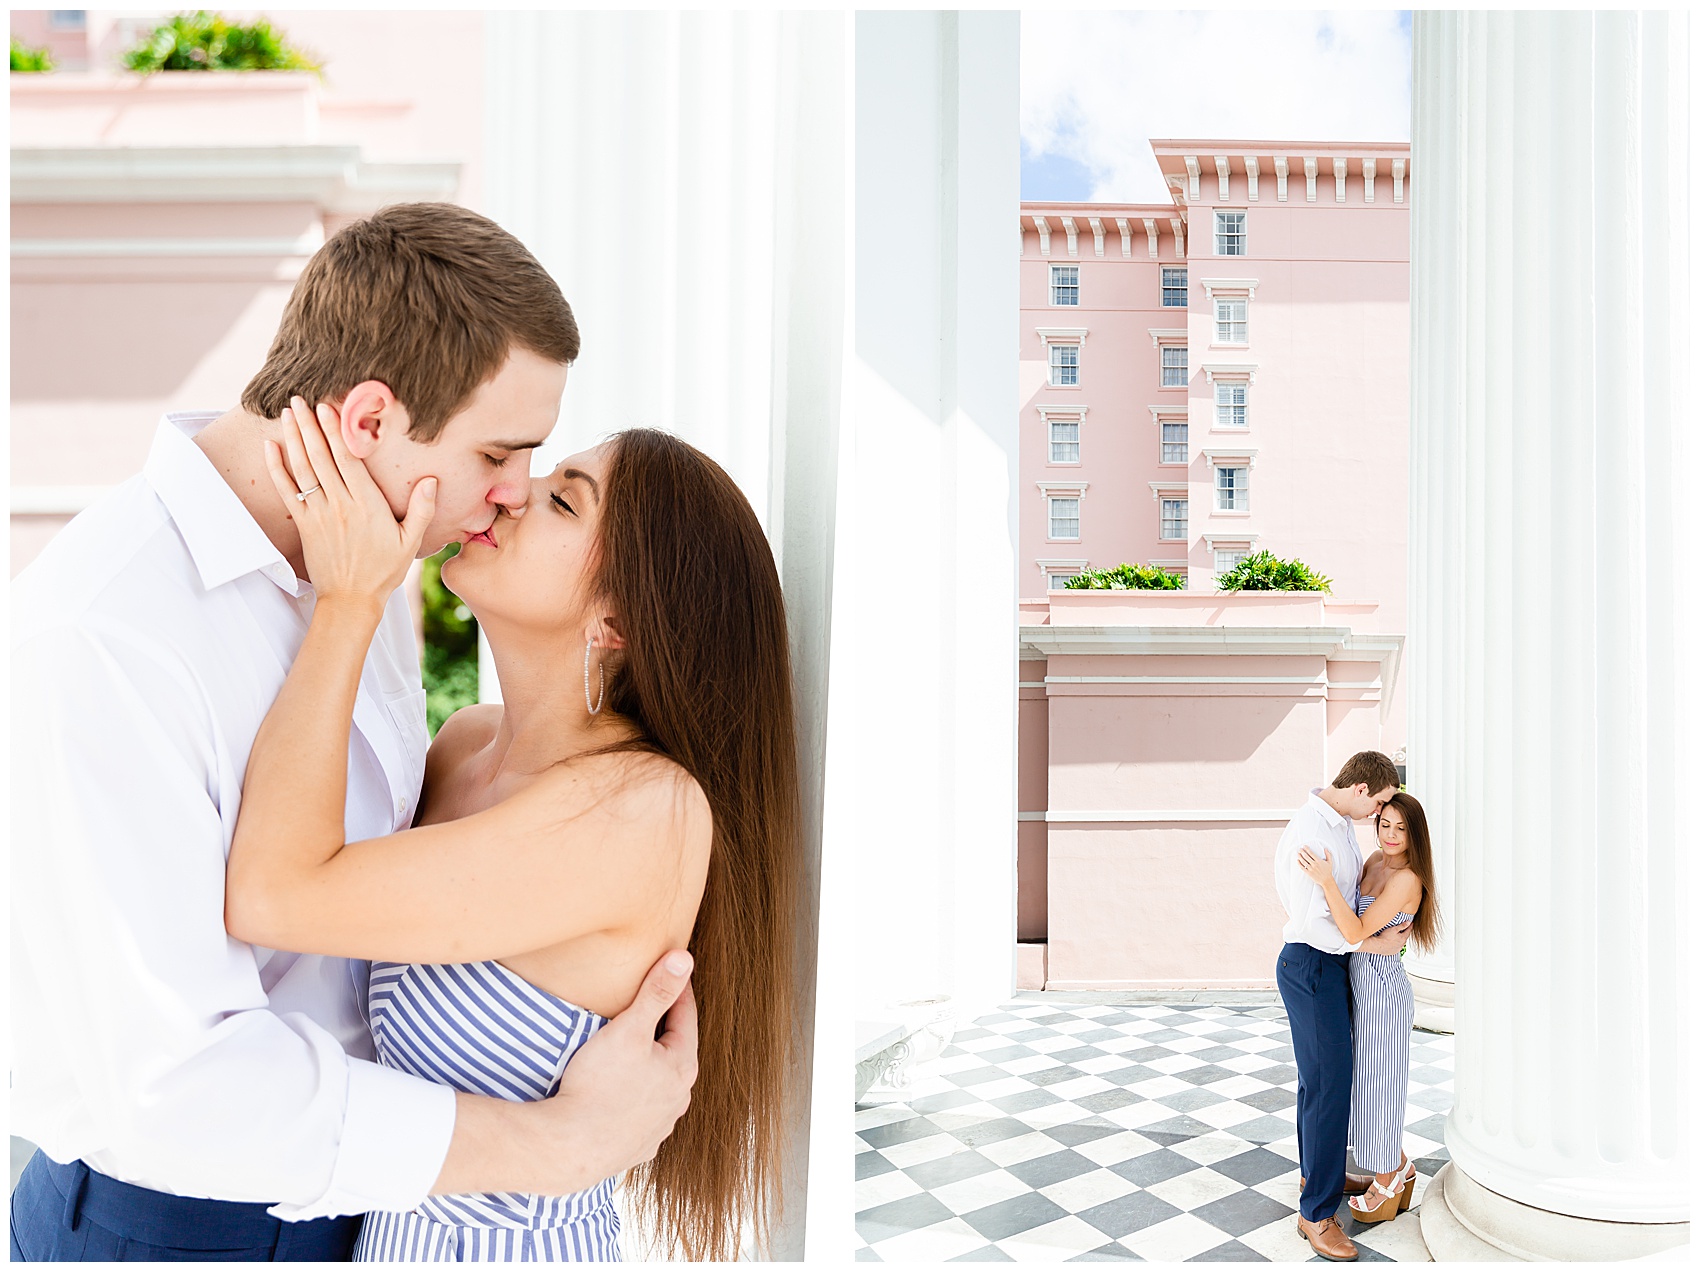 Dreamy engagement photos on a checkered floor 